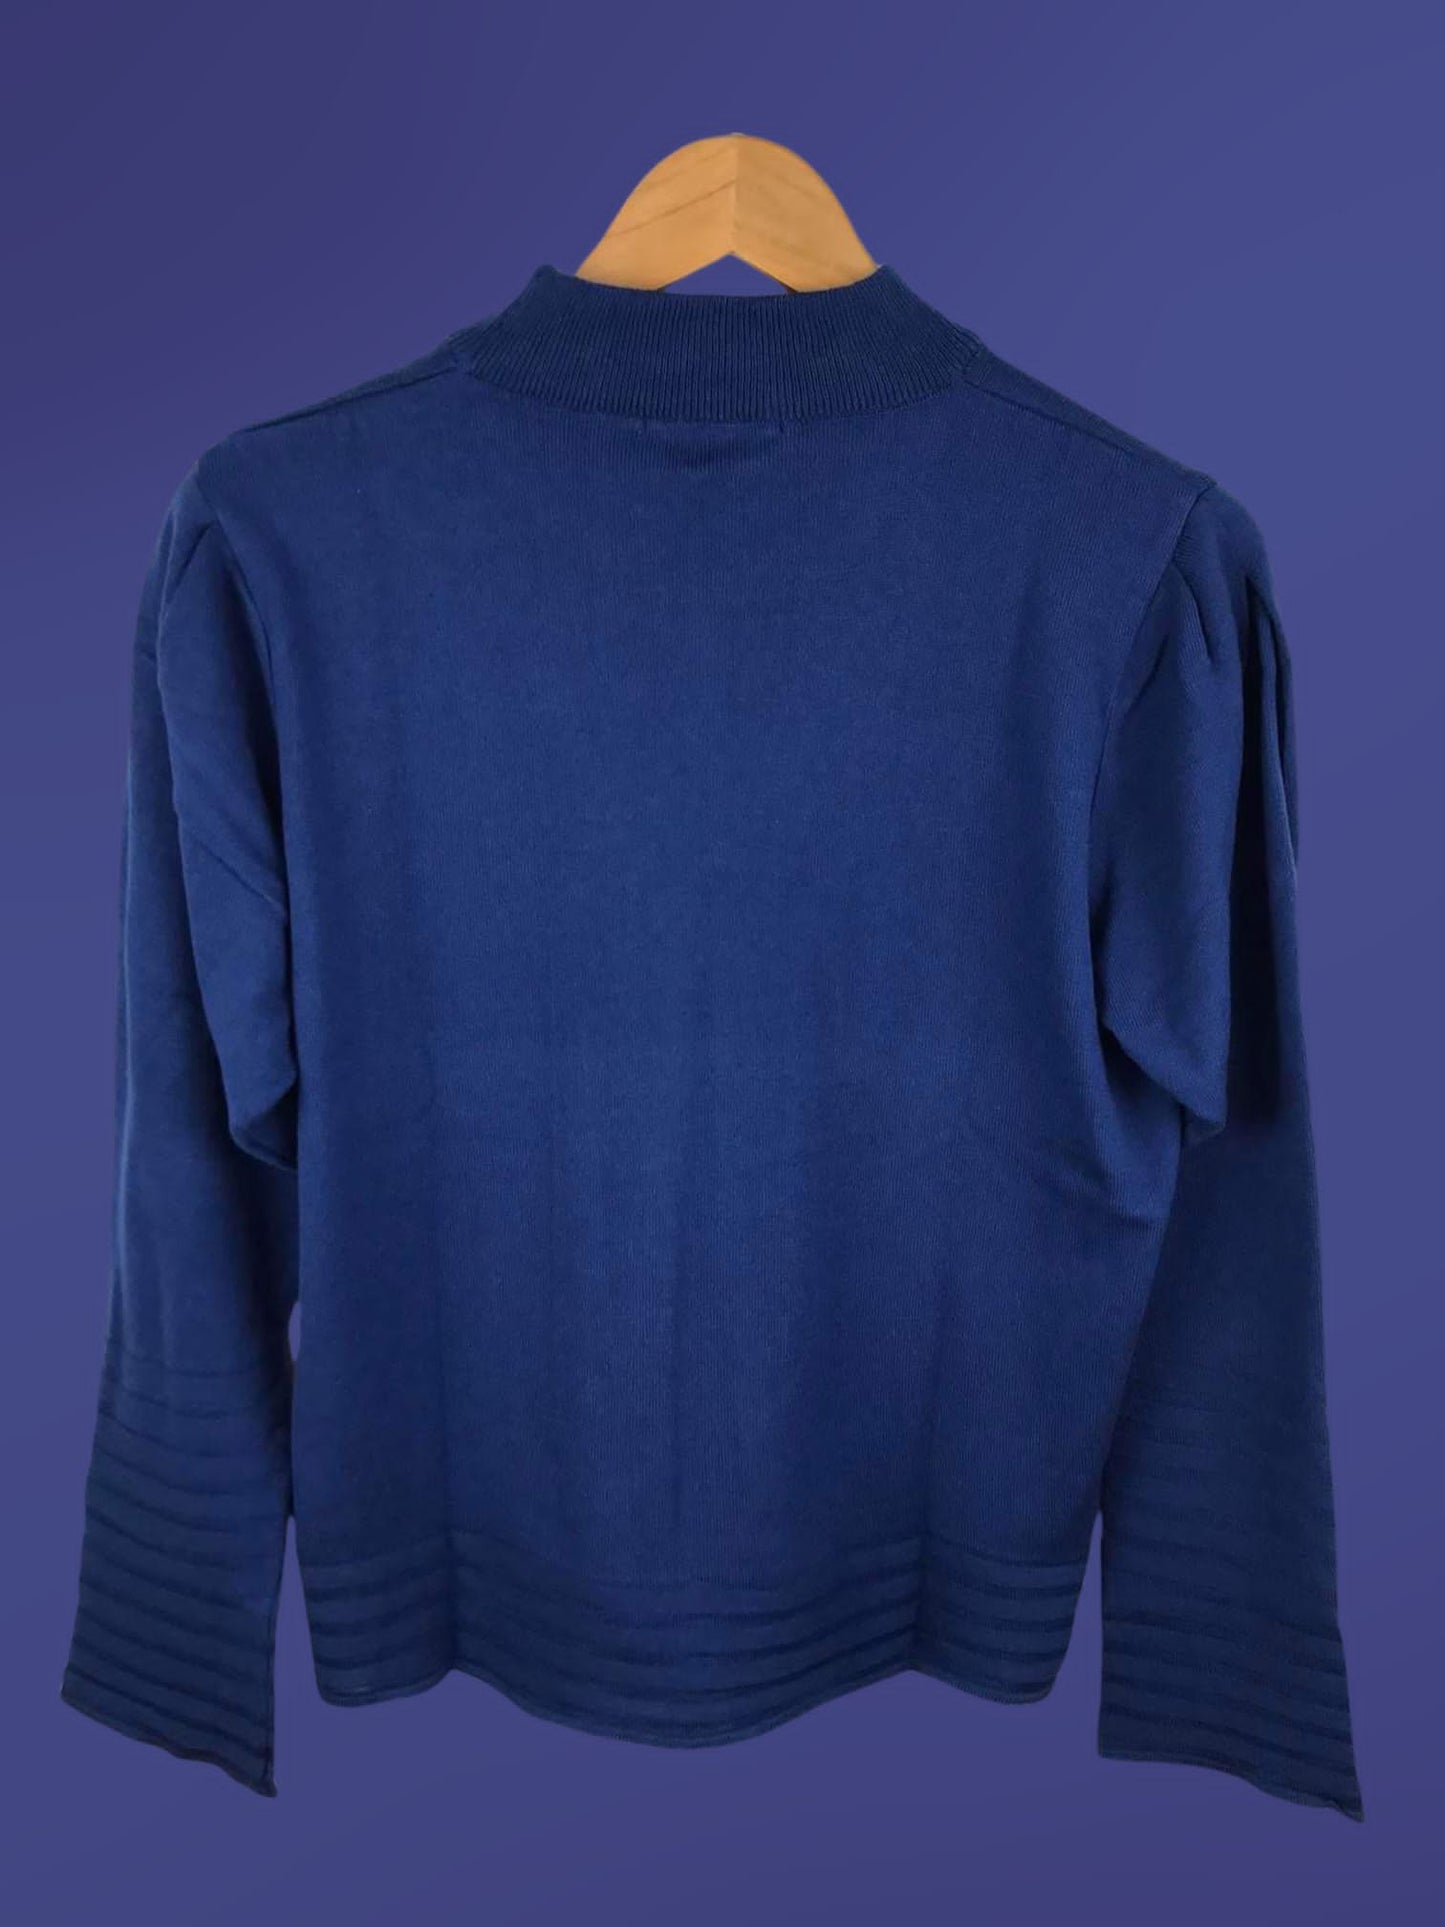 NewCotton | Women's fine knit sweater with semi-swan neck in ink blue Oboe